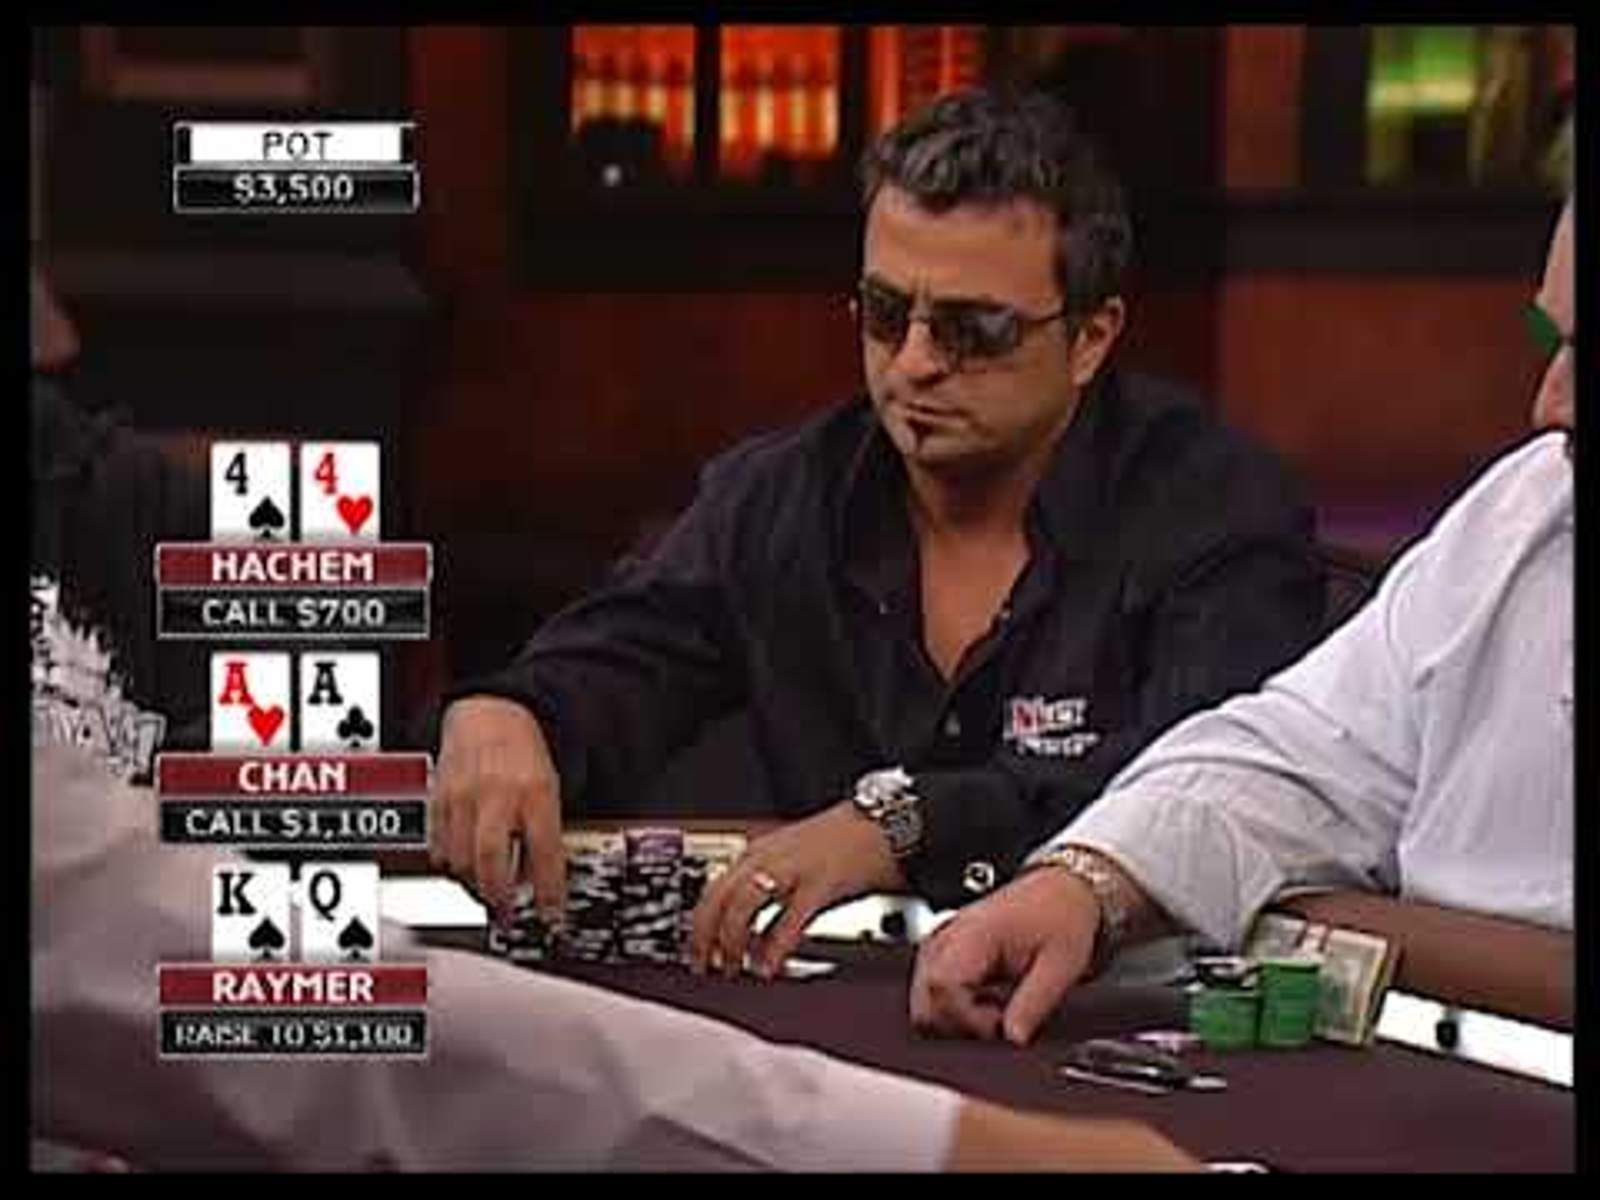 Throwback Hands: Greg Raymer is Drawing Dead Against Johnny Chan